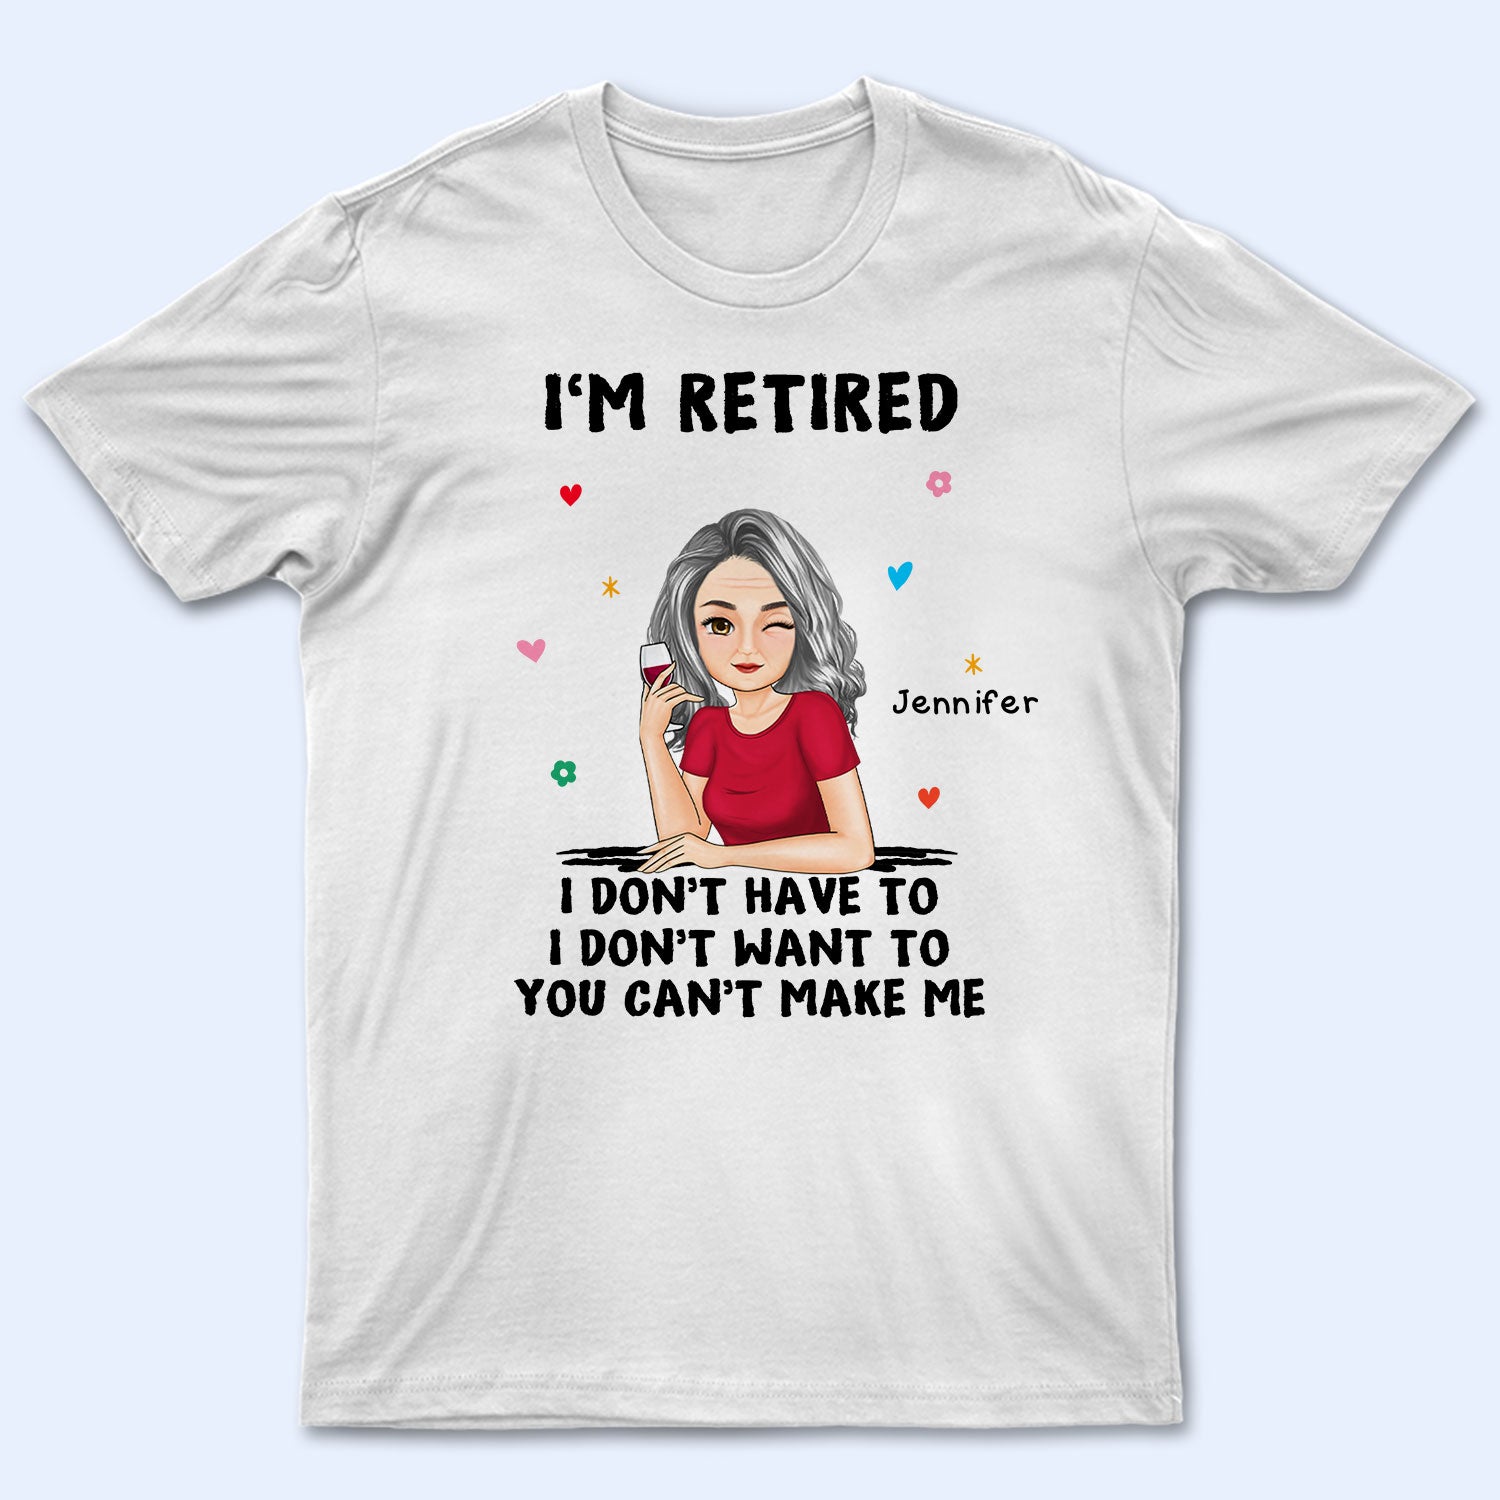 I'm Retired You Can't Make Me - Retirement Gift - Personalized T Shirt